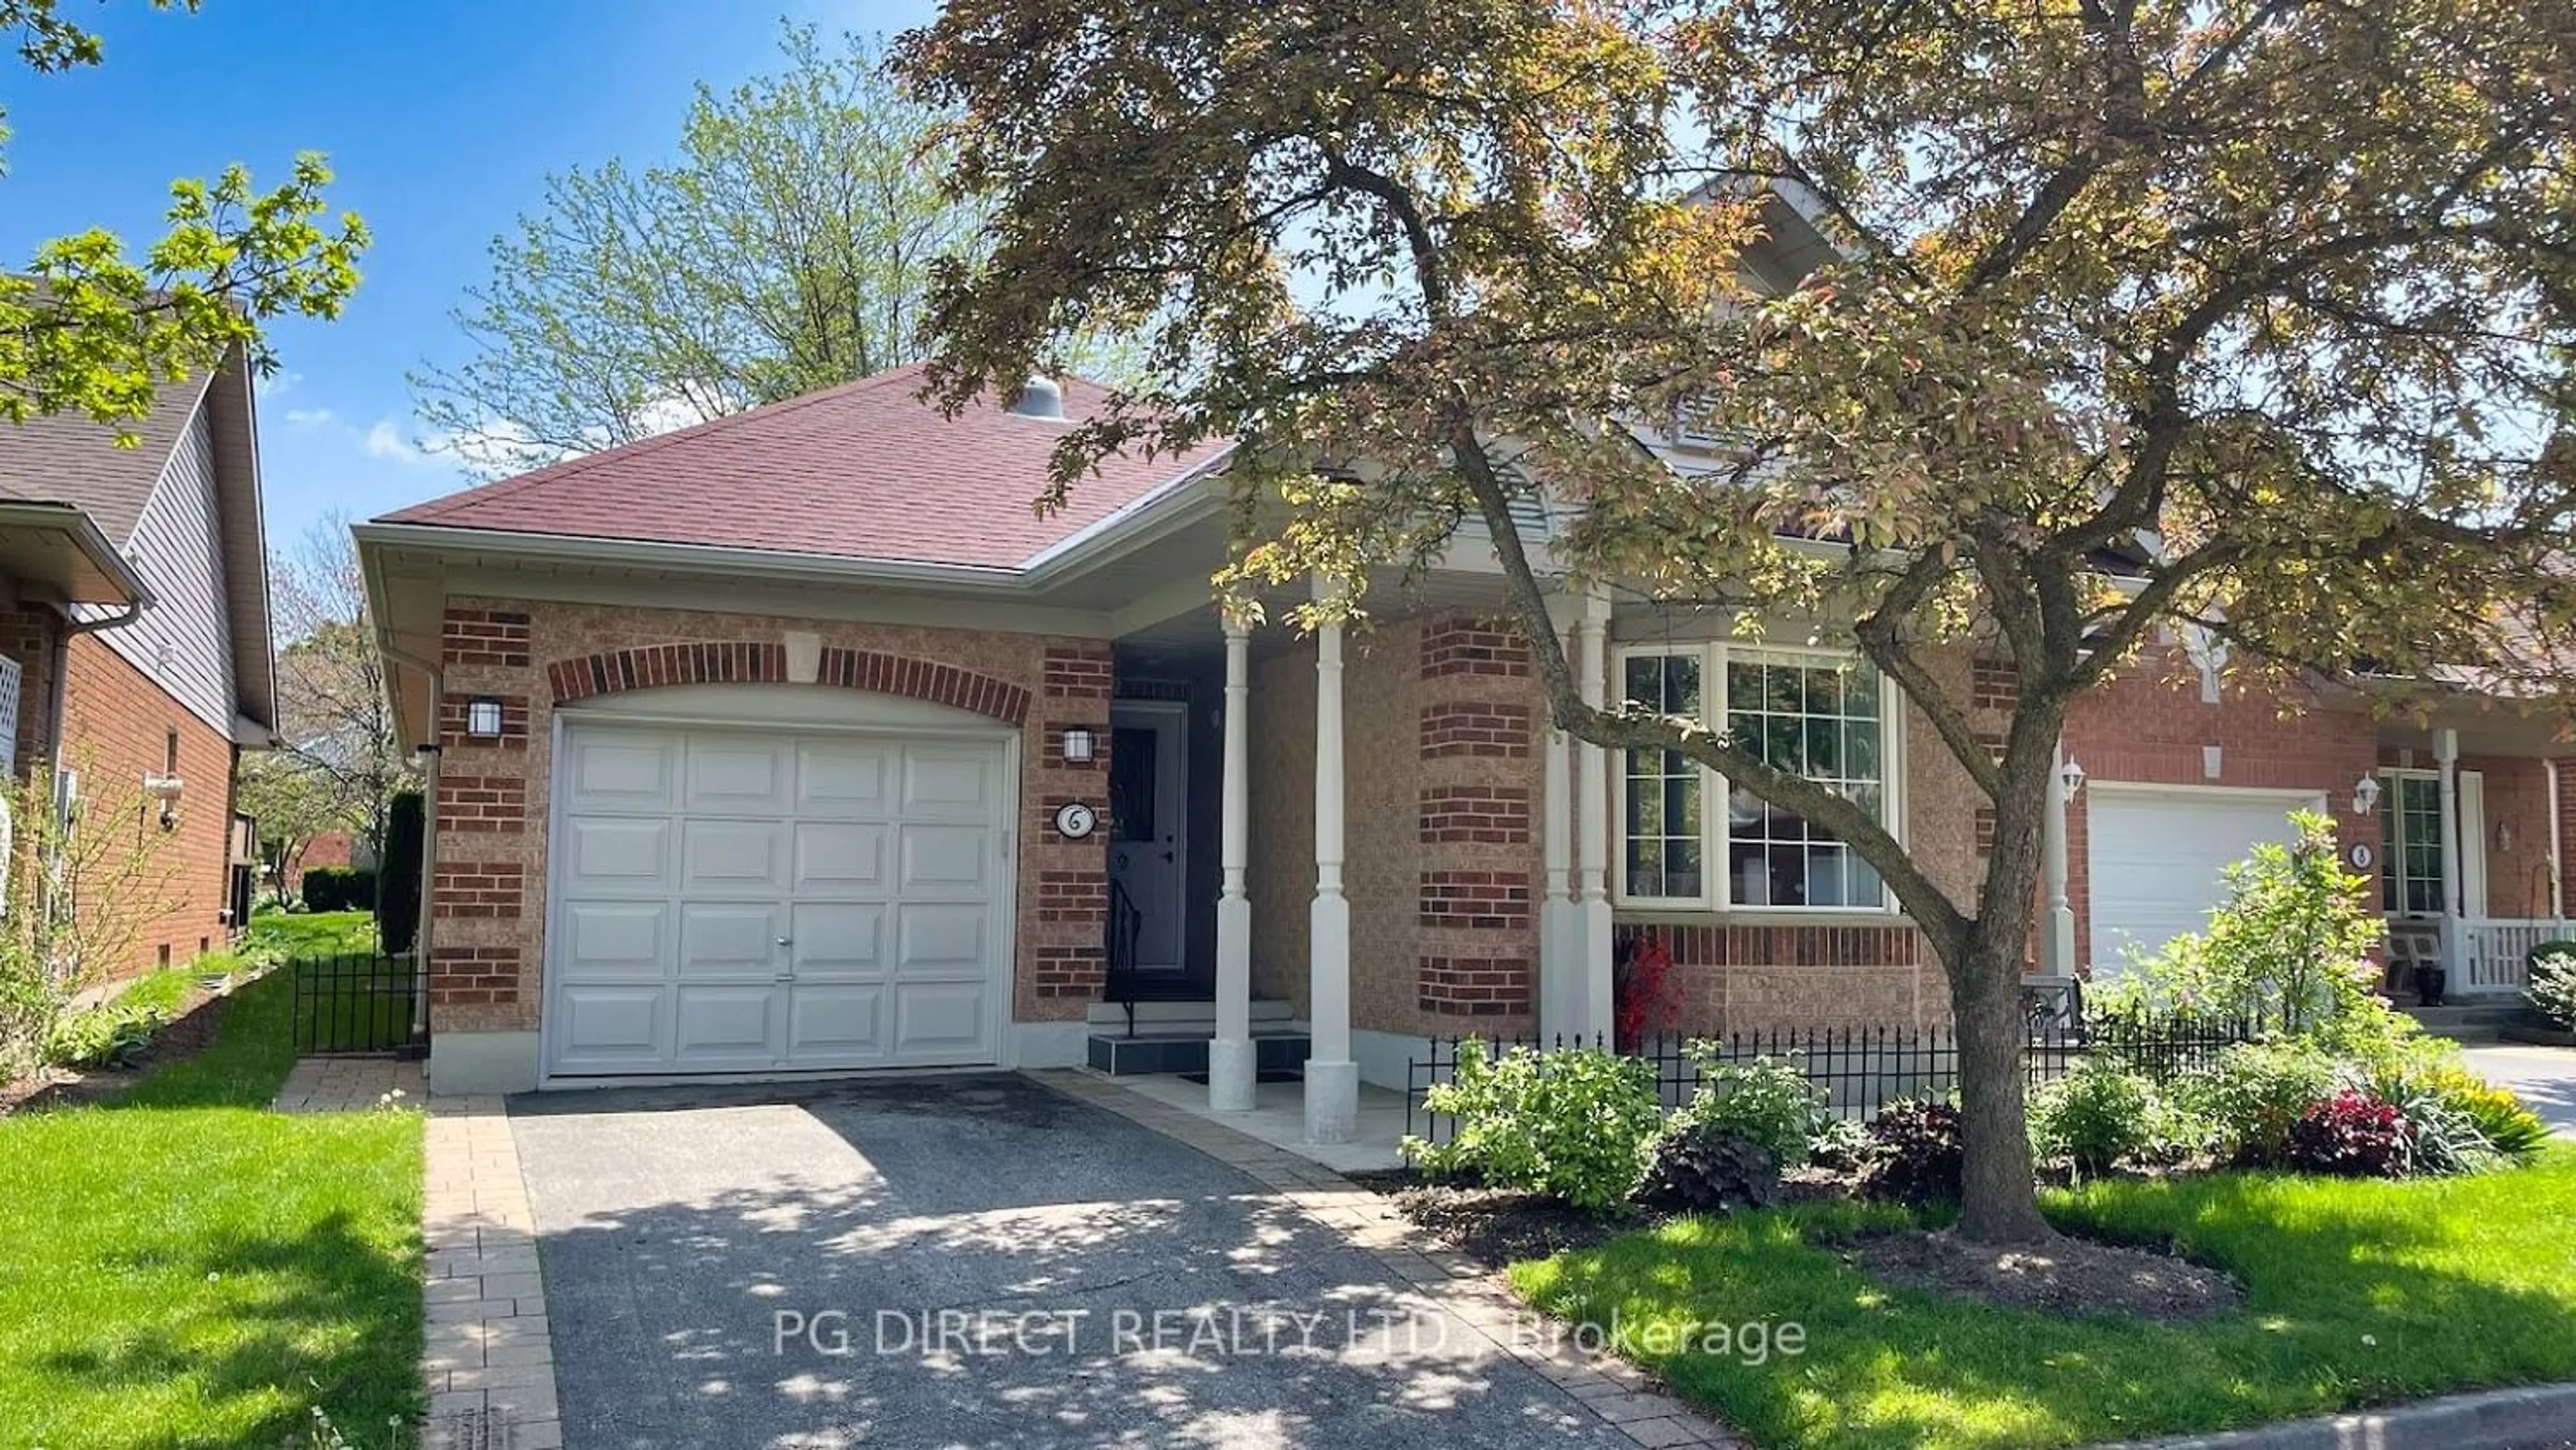 Home with brick exterior material for 6 White Pine Way, Guelph Ontario N1G 4X7